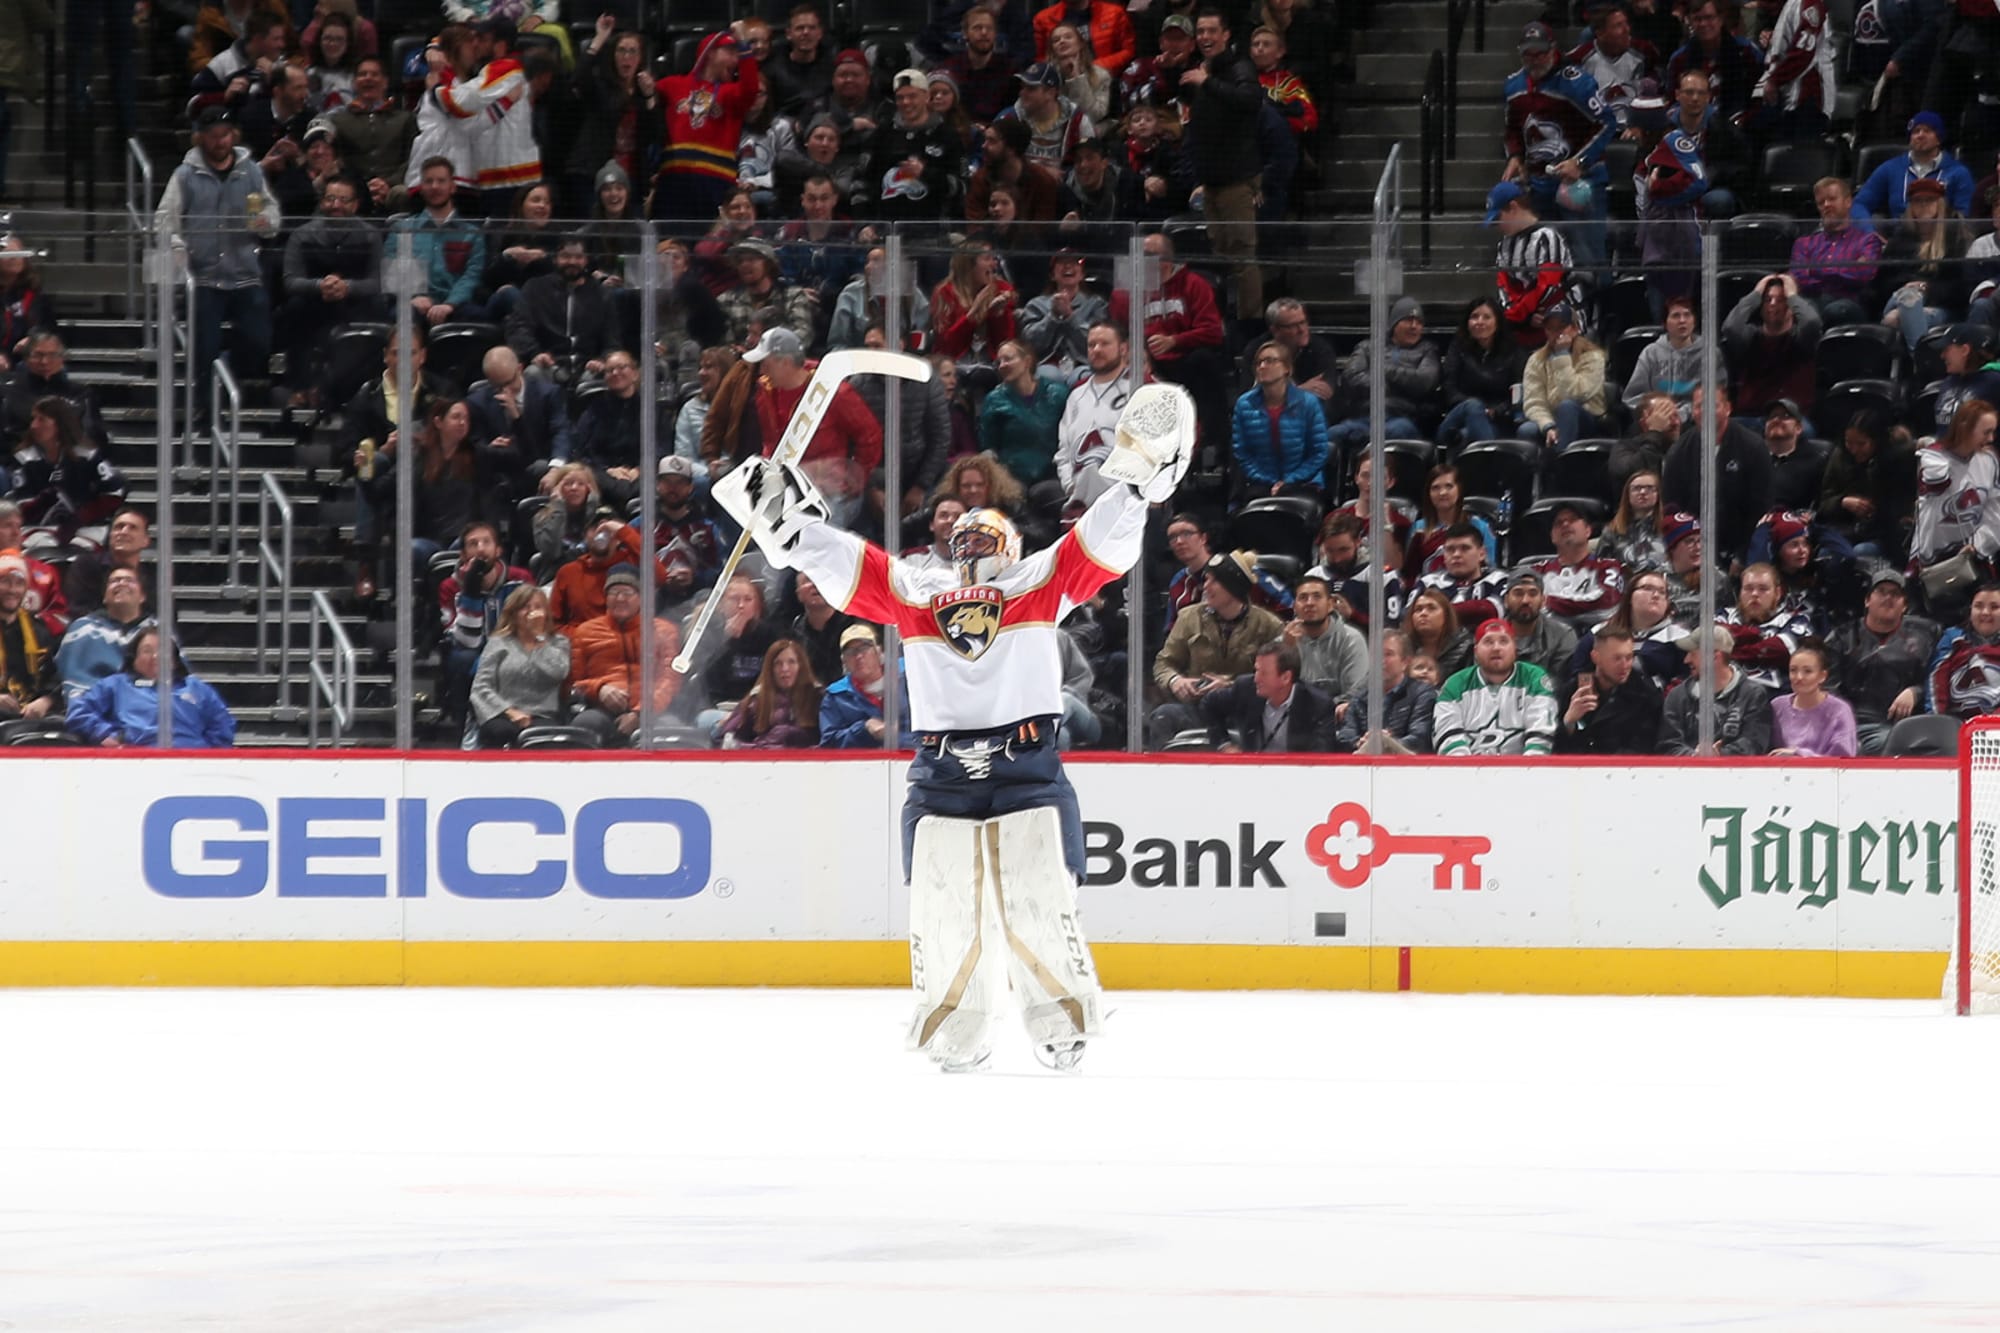 Ex-goalie Roberto Luongo has jersey retired by Florida Panthers